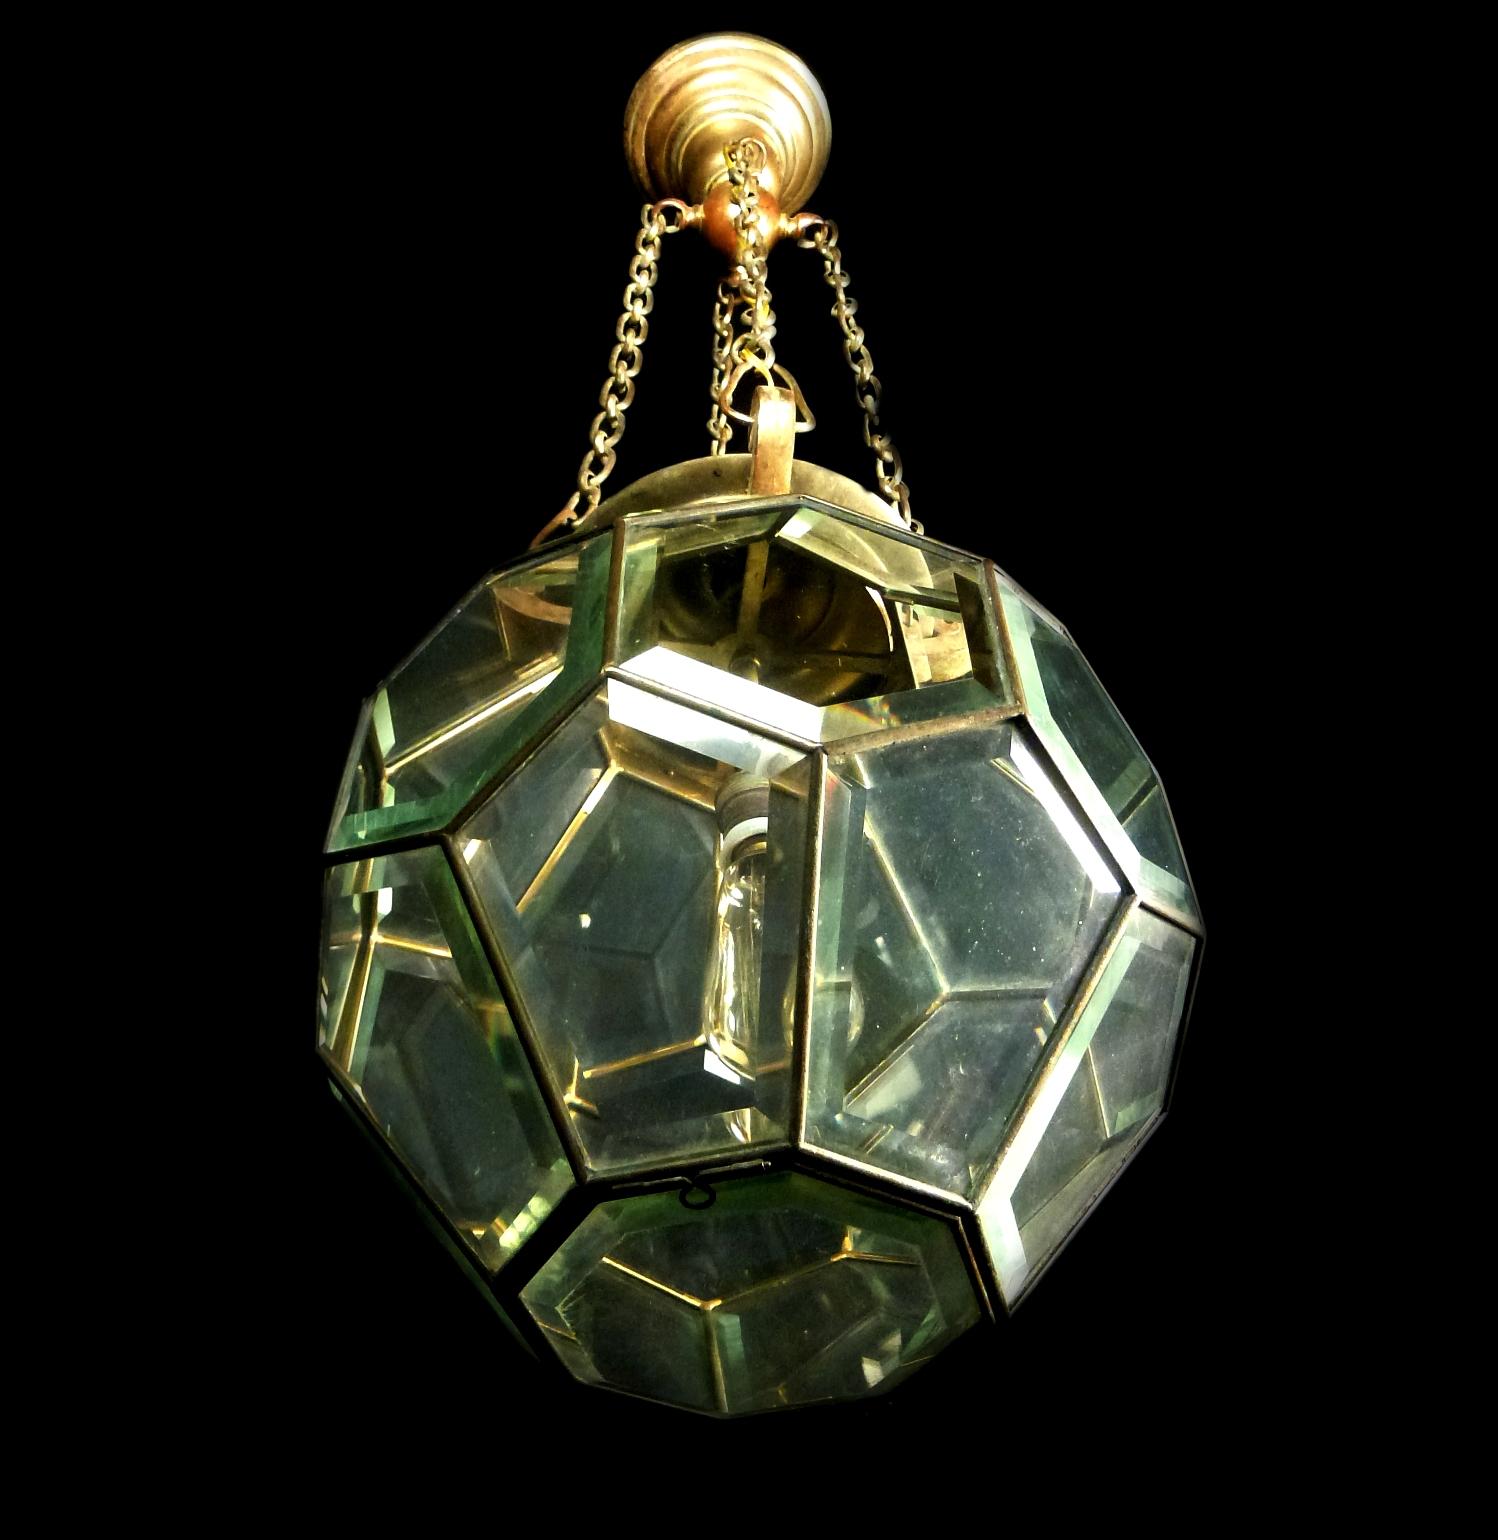 Vienna Secession Pentagon Beveled Glass Geometric Ceiling Light in Adolf Loos Style, Early 1900s For Sale